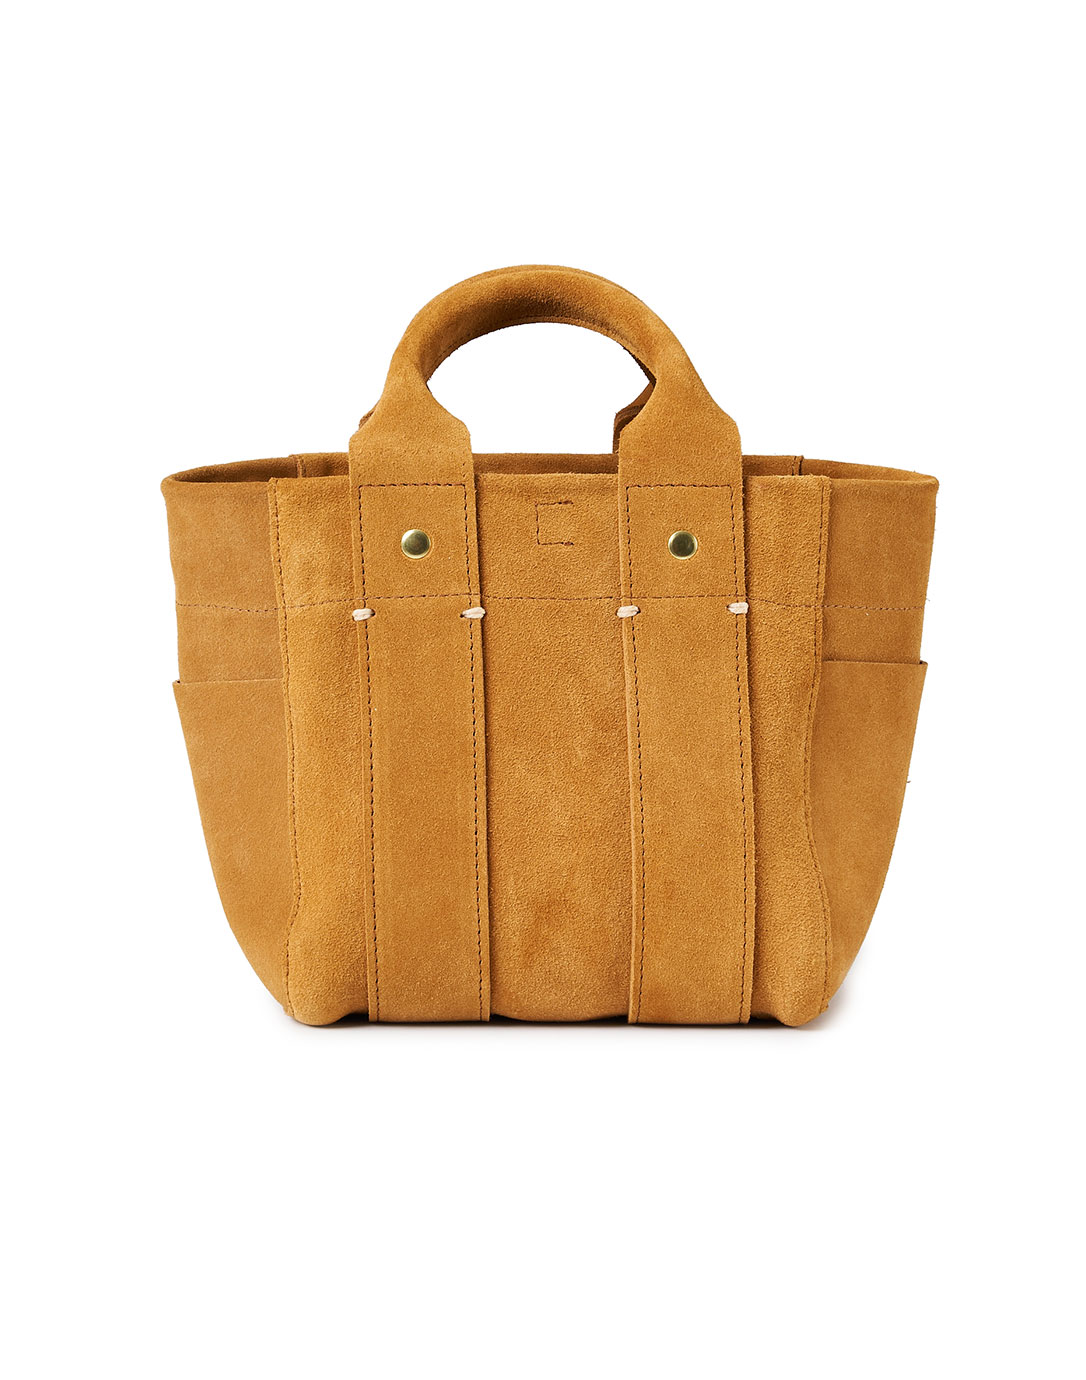 Clare V Brown Leather Tote Clare Vivier Shopping Bag